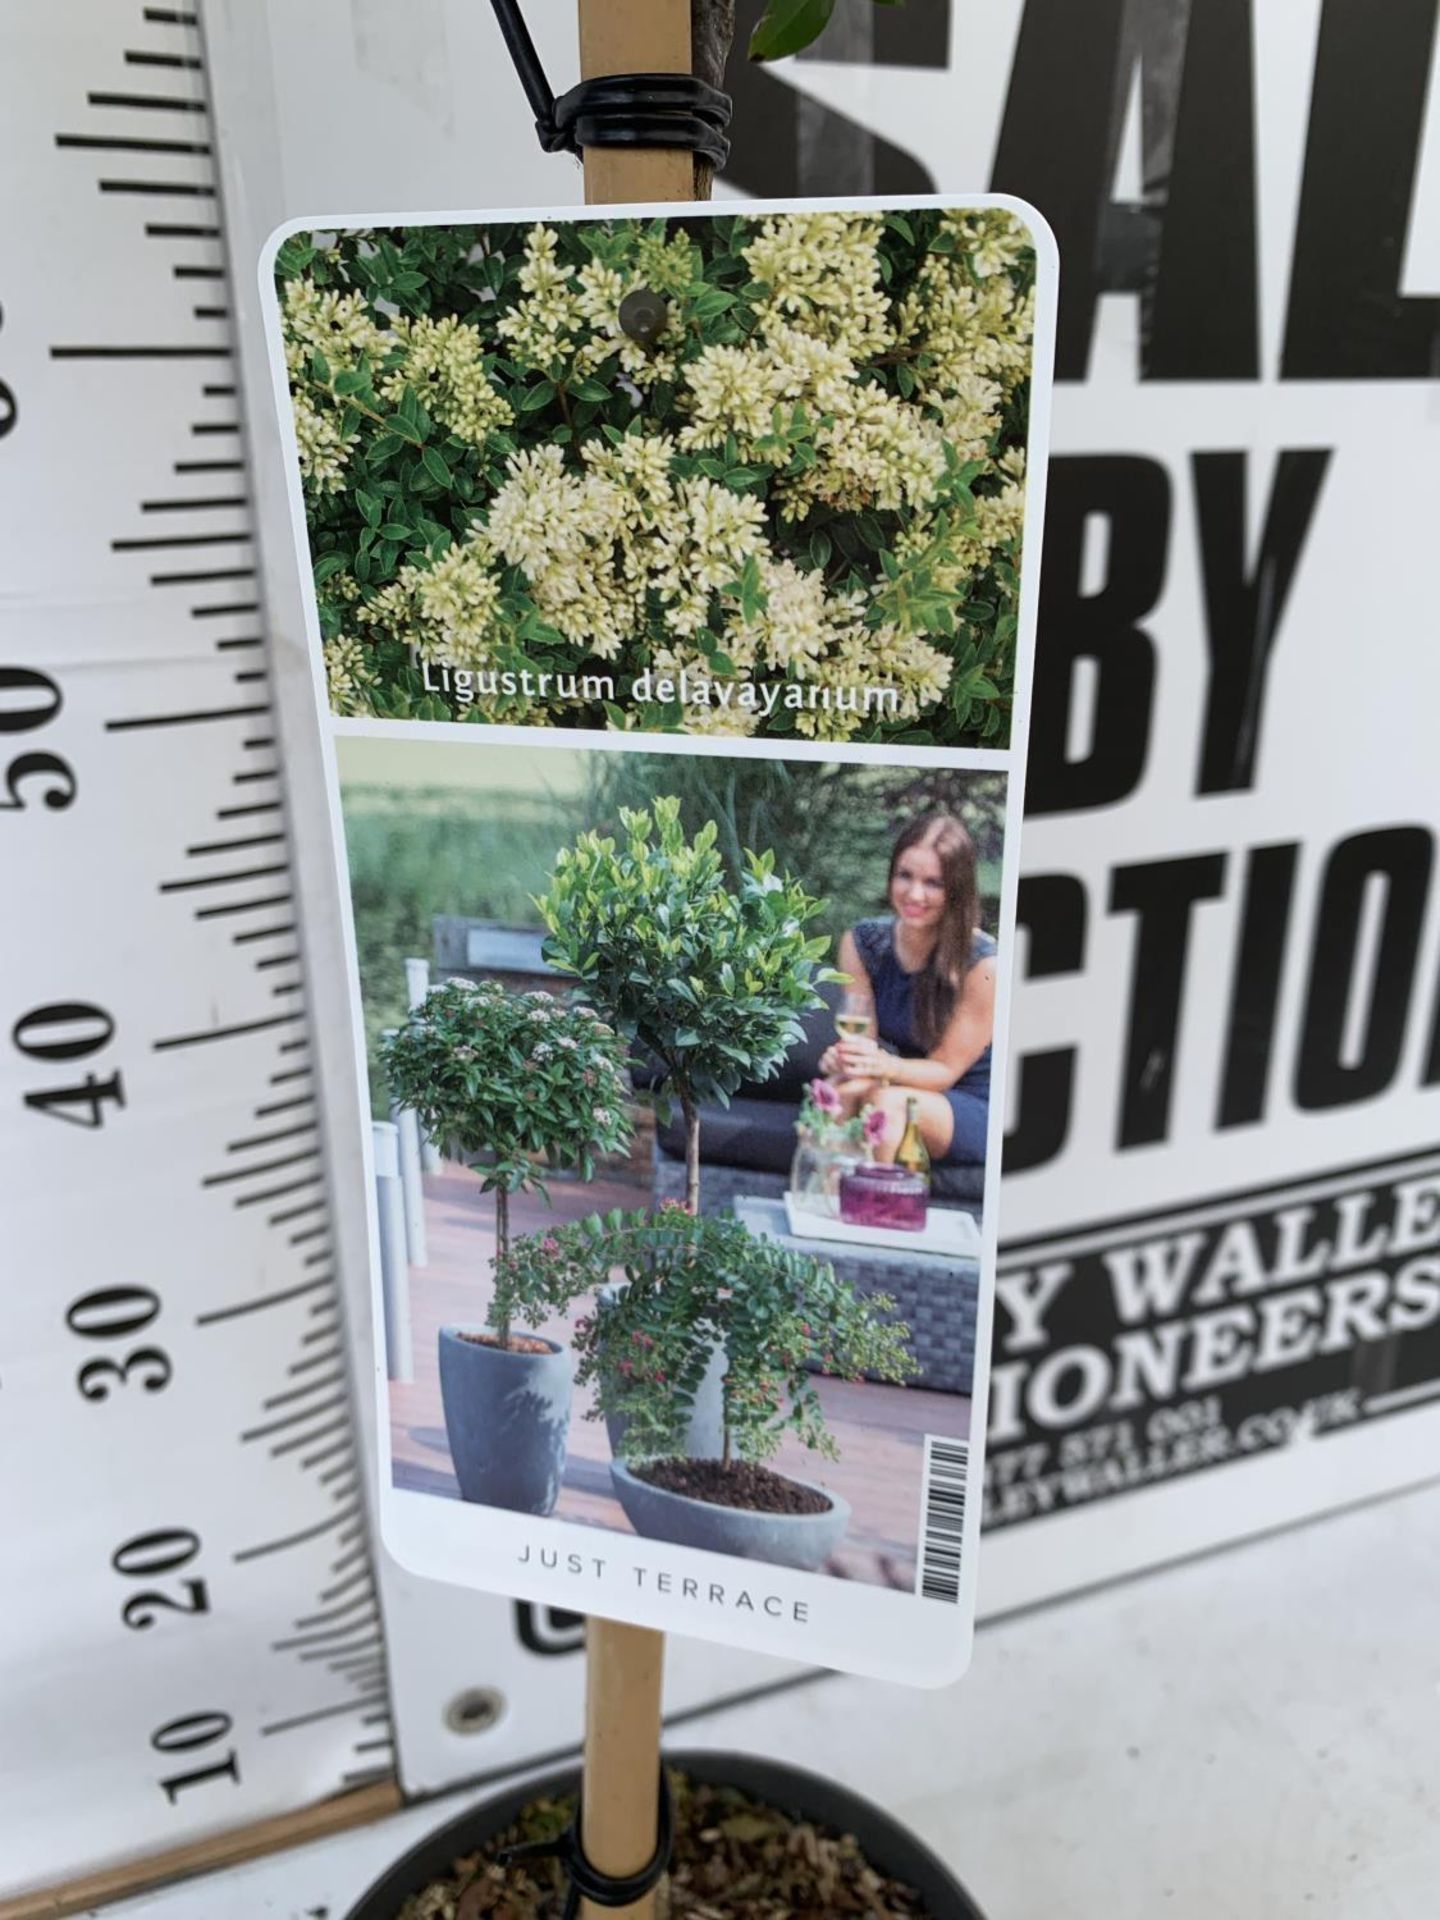 TWO LIGUSTRUM DELAVAYANUM STANDARD TREES APPROX 100CM IN HEIGHT IN 3LTR POTS PLUS VAT TO BE SOLD FOR - Bild 4 aus 4